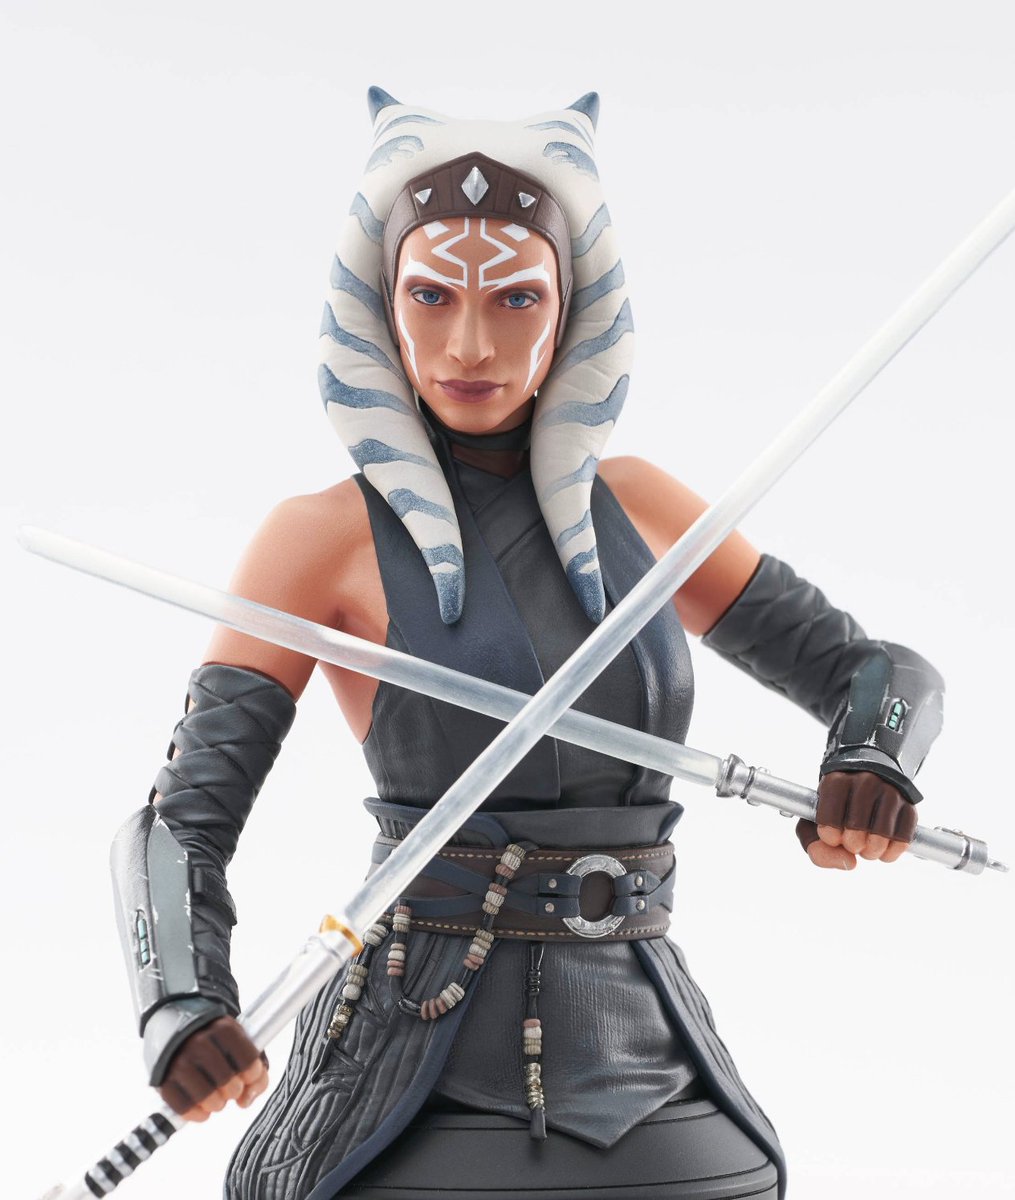 I am very pleased with the #Ahsoka series. To me, she's a character I hold dear (I named my dog after her 🙂). I created this 'tribute' using #StableDiffusion, using a pose I found online from a toy (right) #starwarsahsoka #ControlNet #SDXL #StarWars #conceptartAI